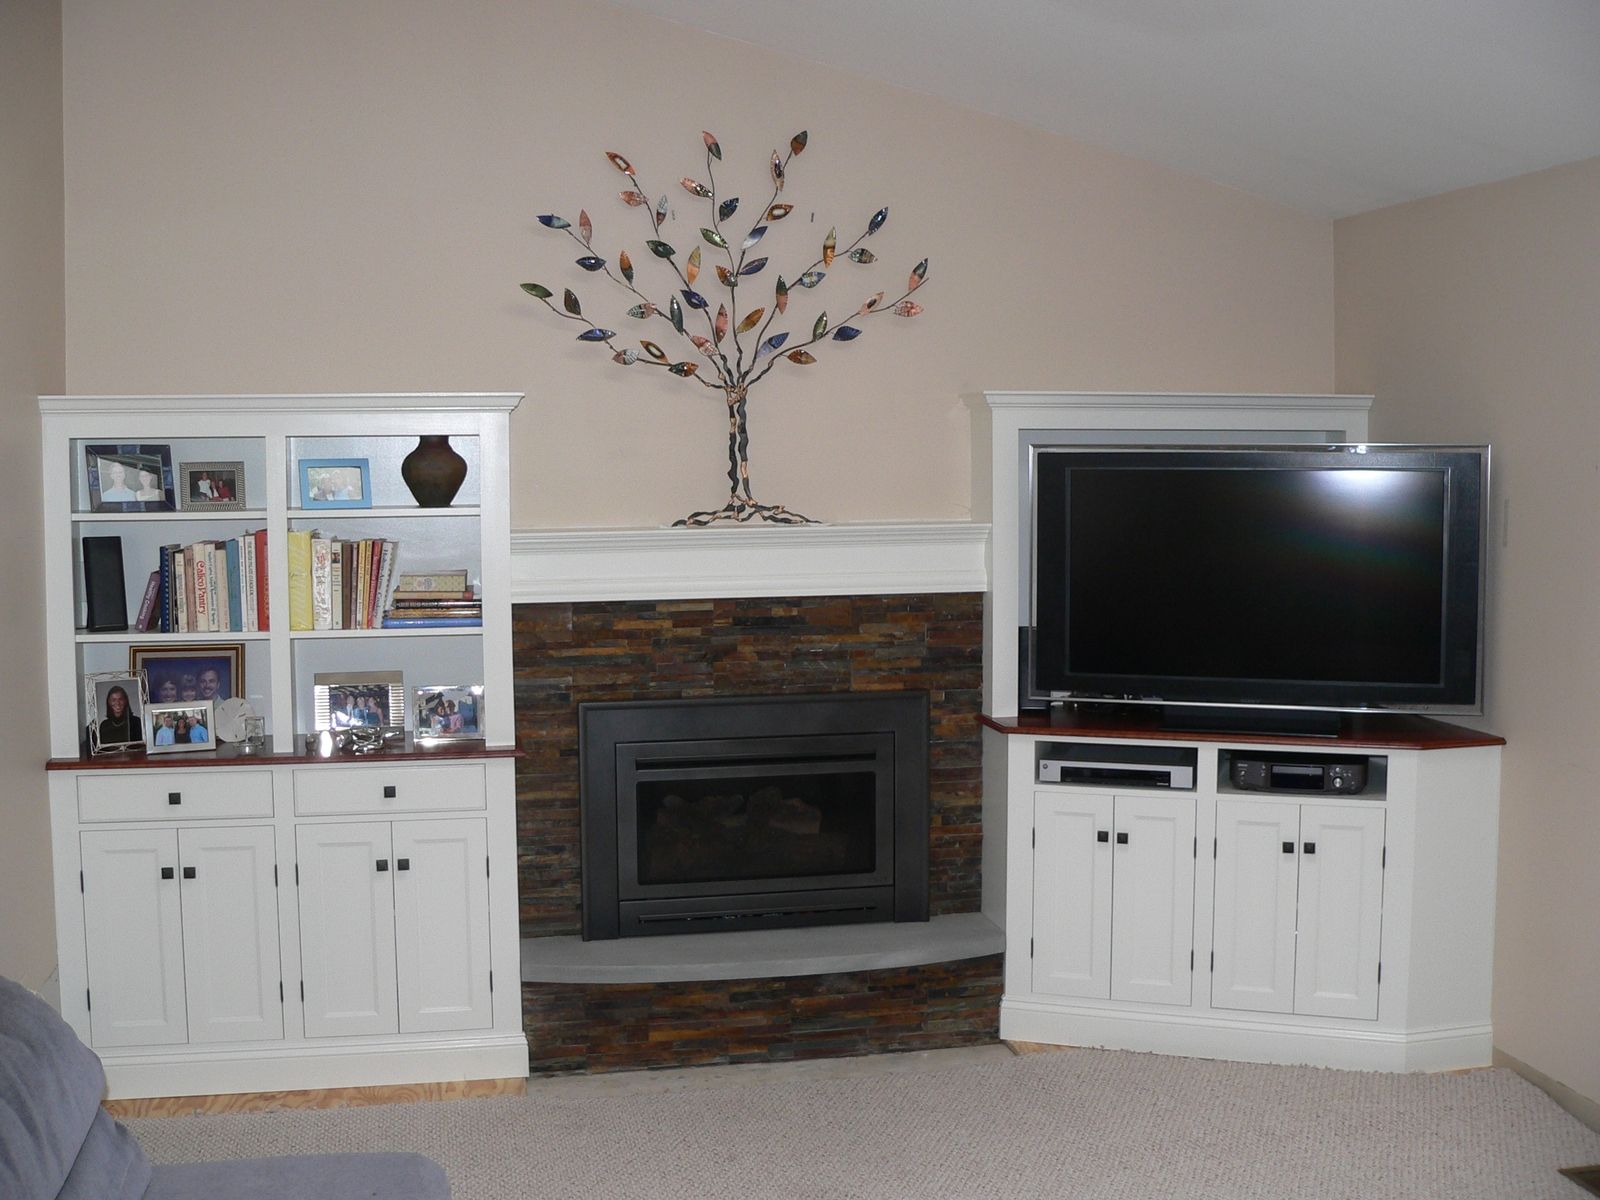 Custom Cabinets Around Fireplace By, Wall To Entertainment Center Bookcase And Fireplace Design Inc